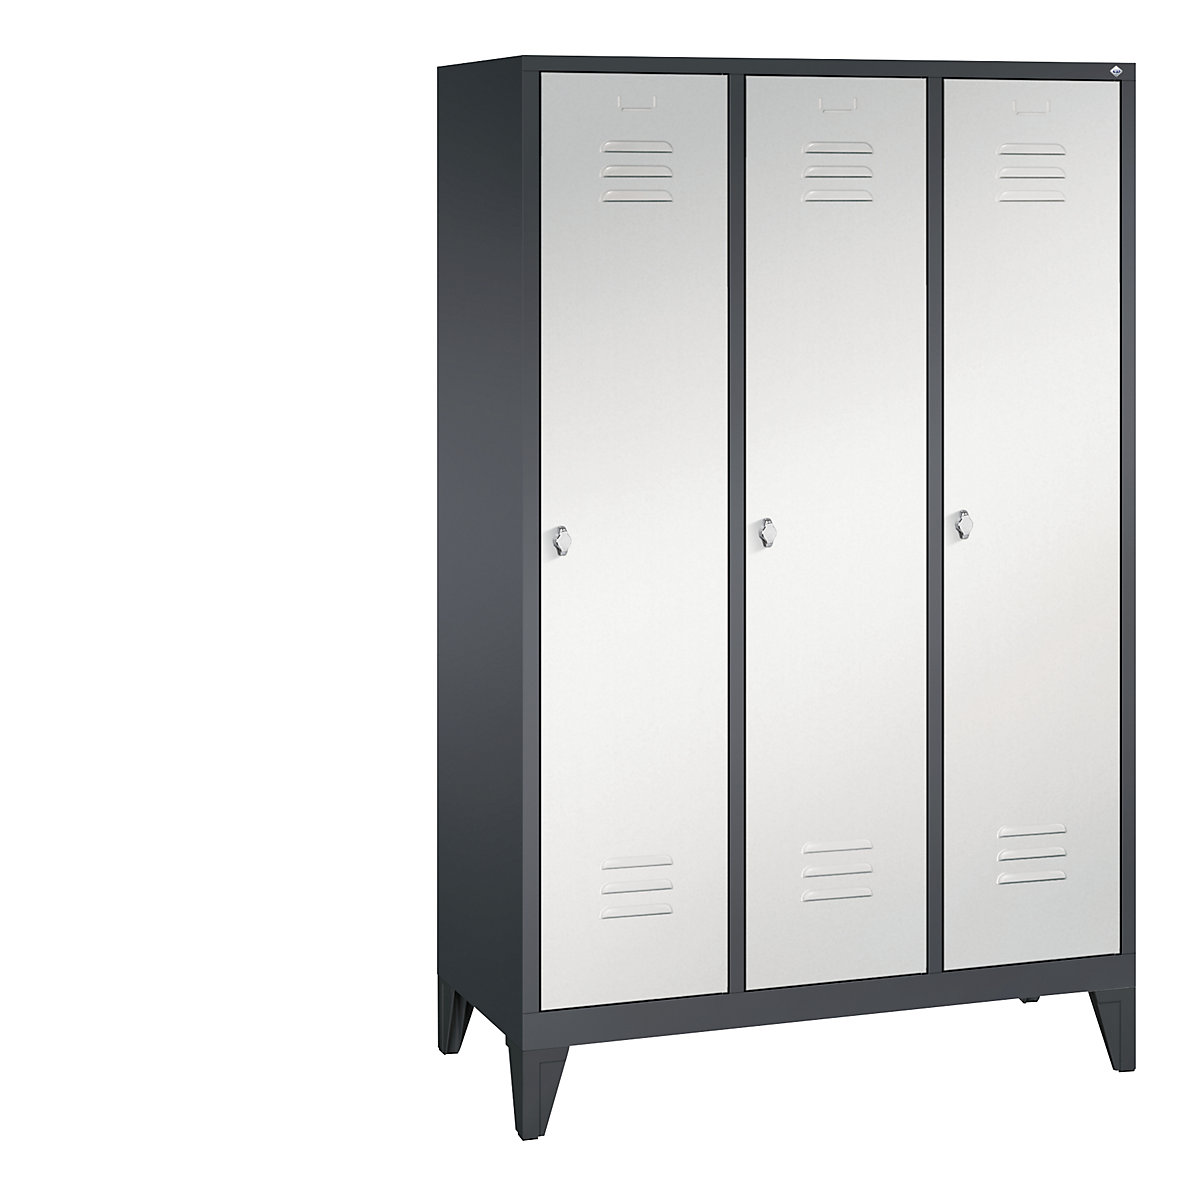 CLASSIC cloakroom locker with feet – C+P, 3 compartments, compartment width 400 mm, black grey / light grey-11